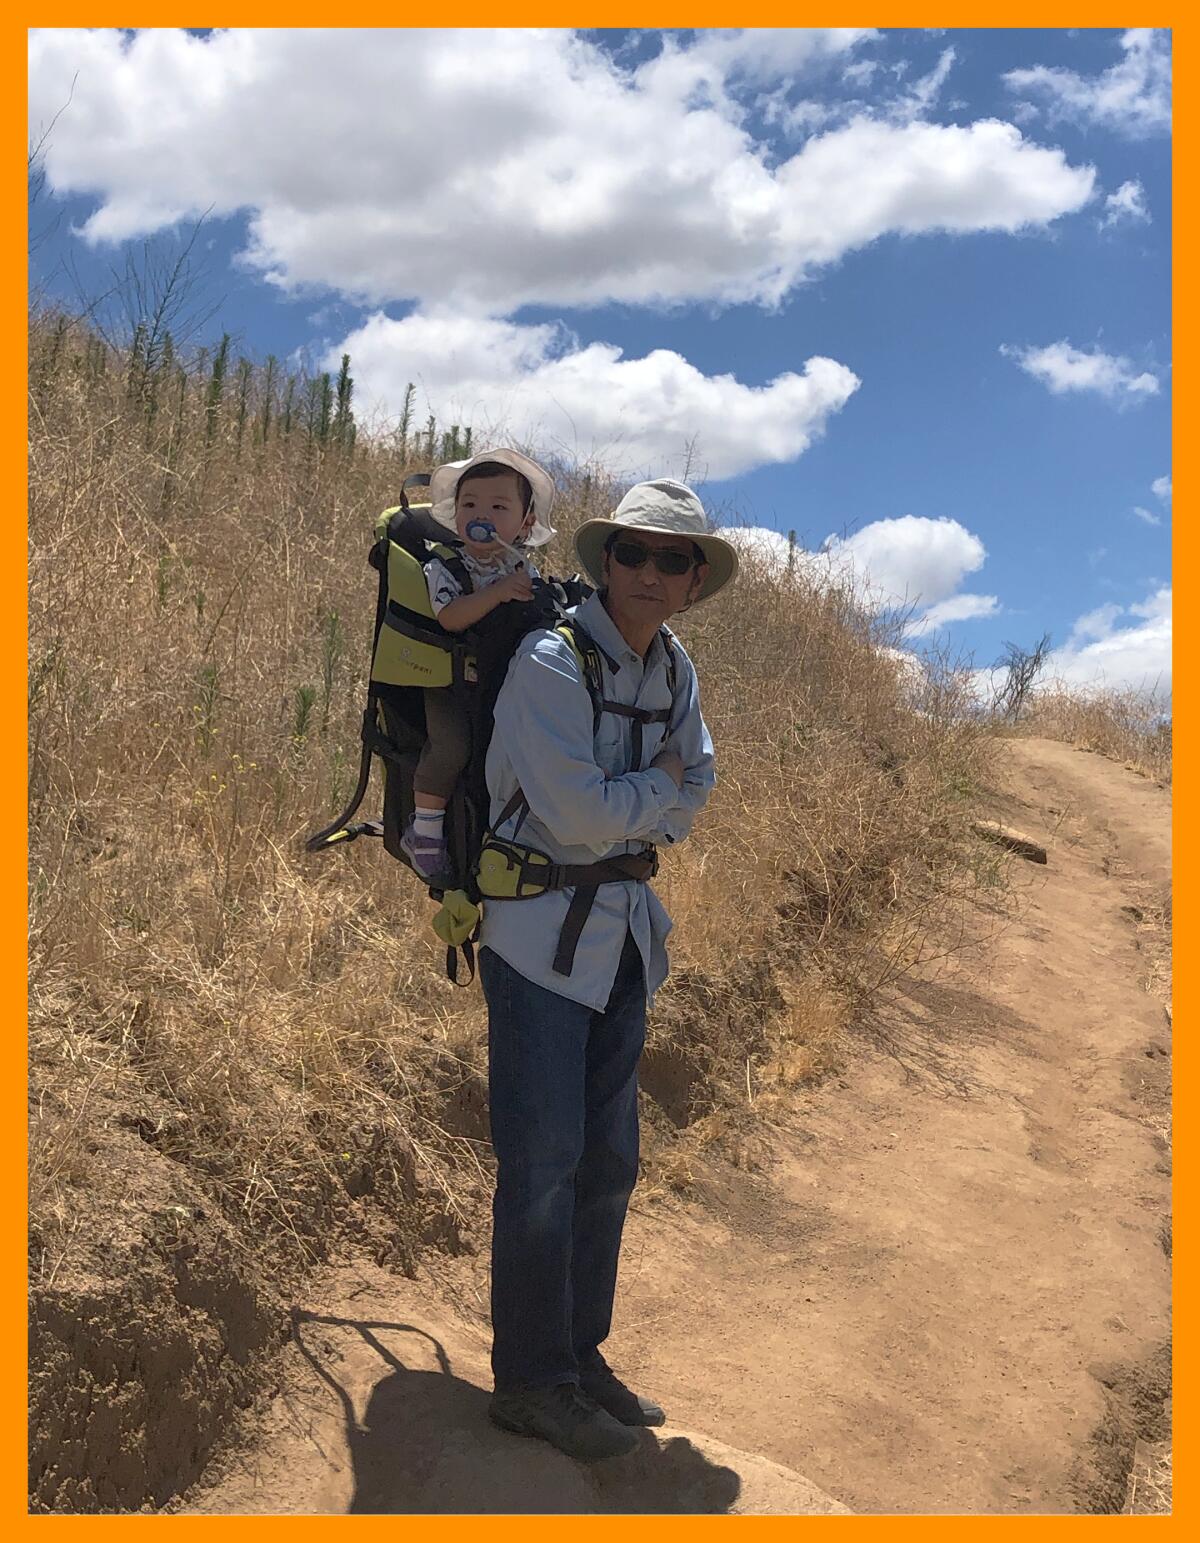 A man in a hat stands with a baby in a carrier on his back on a dirt path under a blue sky with puffy white clouds.